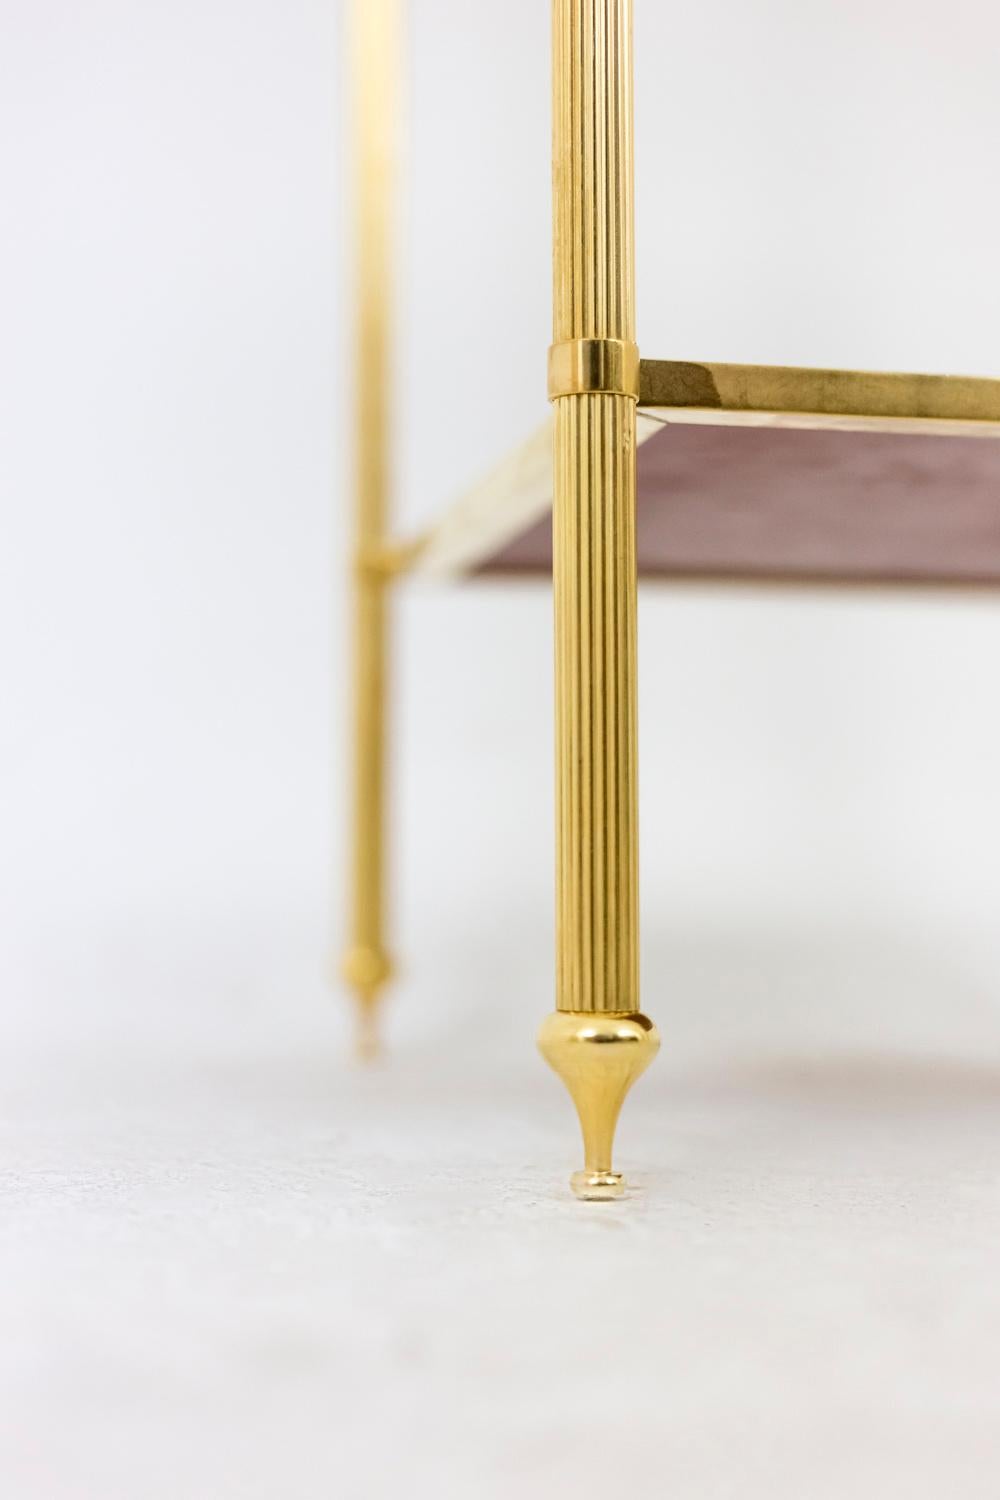 Maison Jansen, Pair of End Tables in Gilt Brass and Oxidized Mirror, 1960s 4